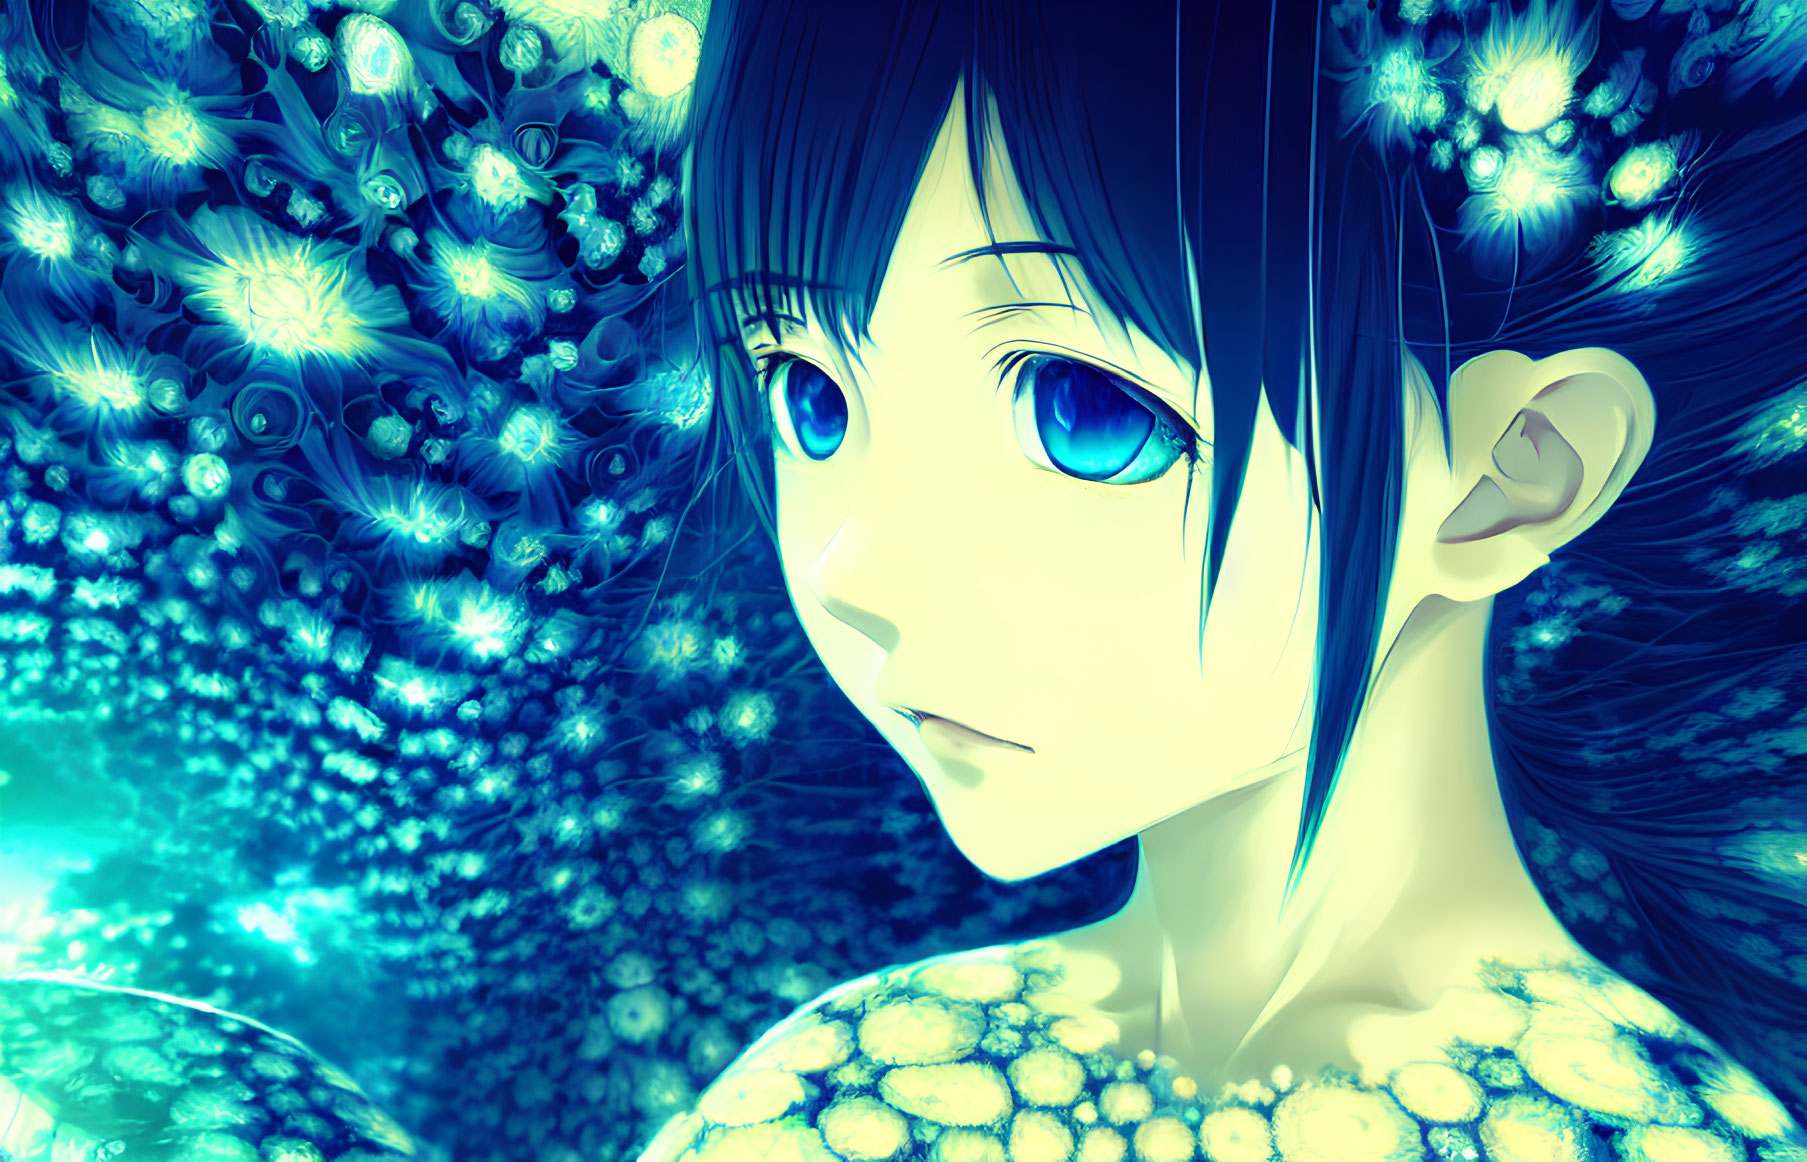 Blue-eyed anime girl with dark hair in fantasy setting with glowing blue flowers.